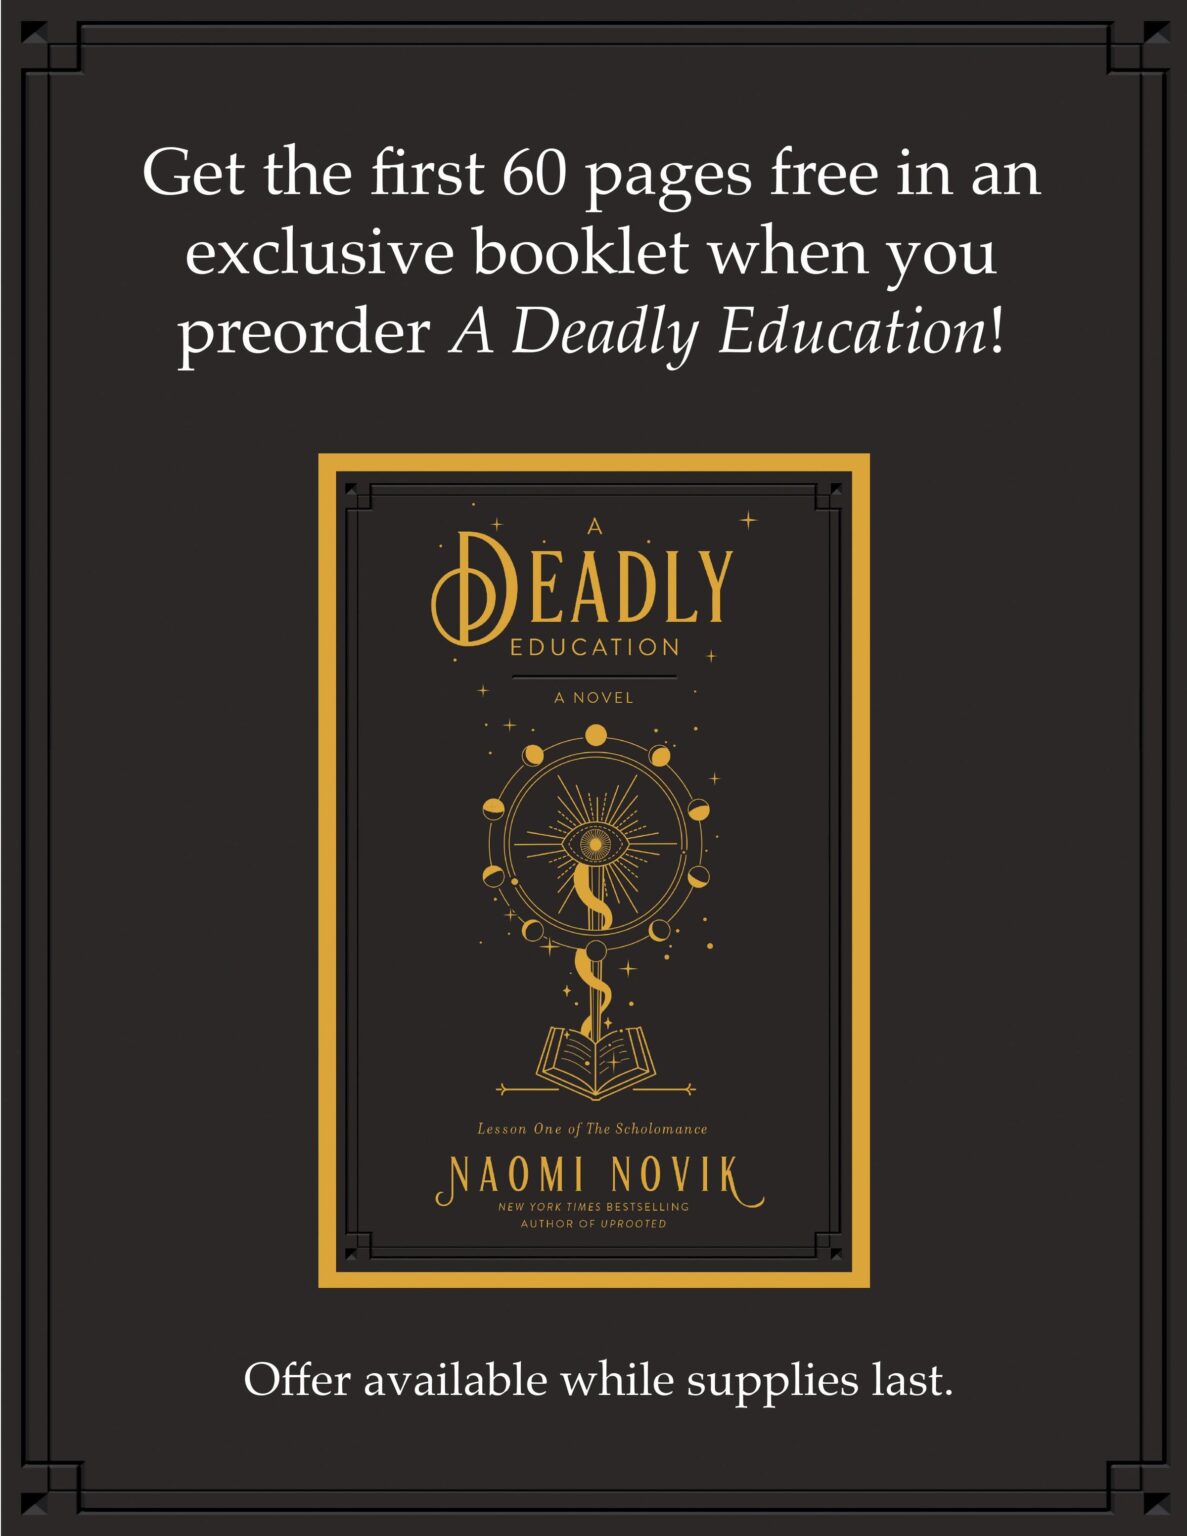 a deadly education series book 3